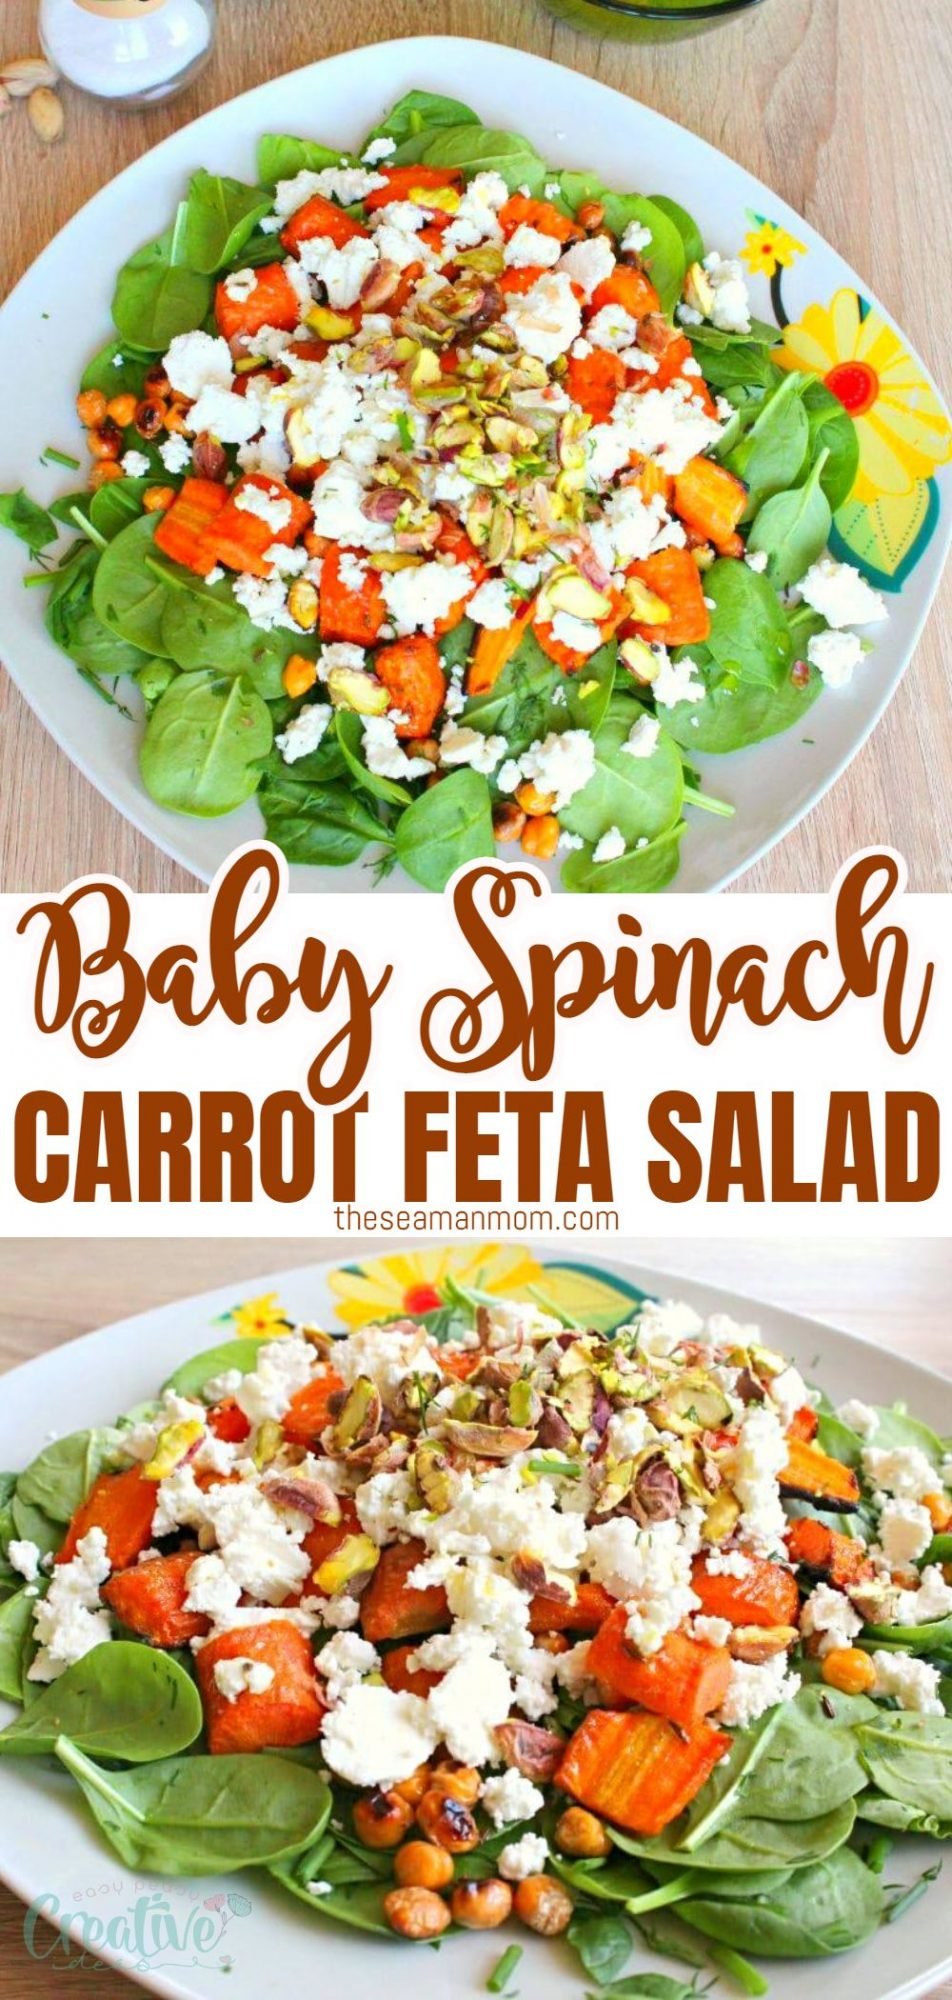 Baby spinach salad